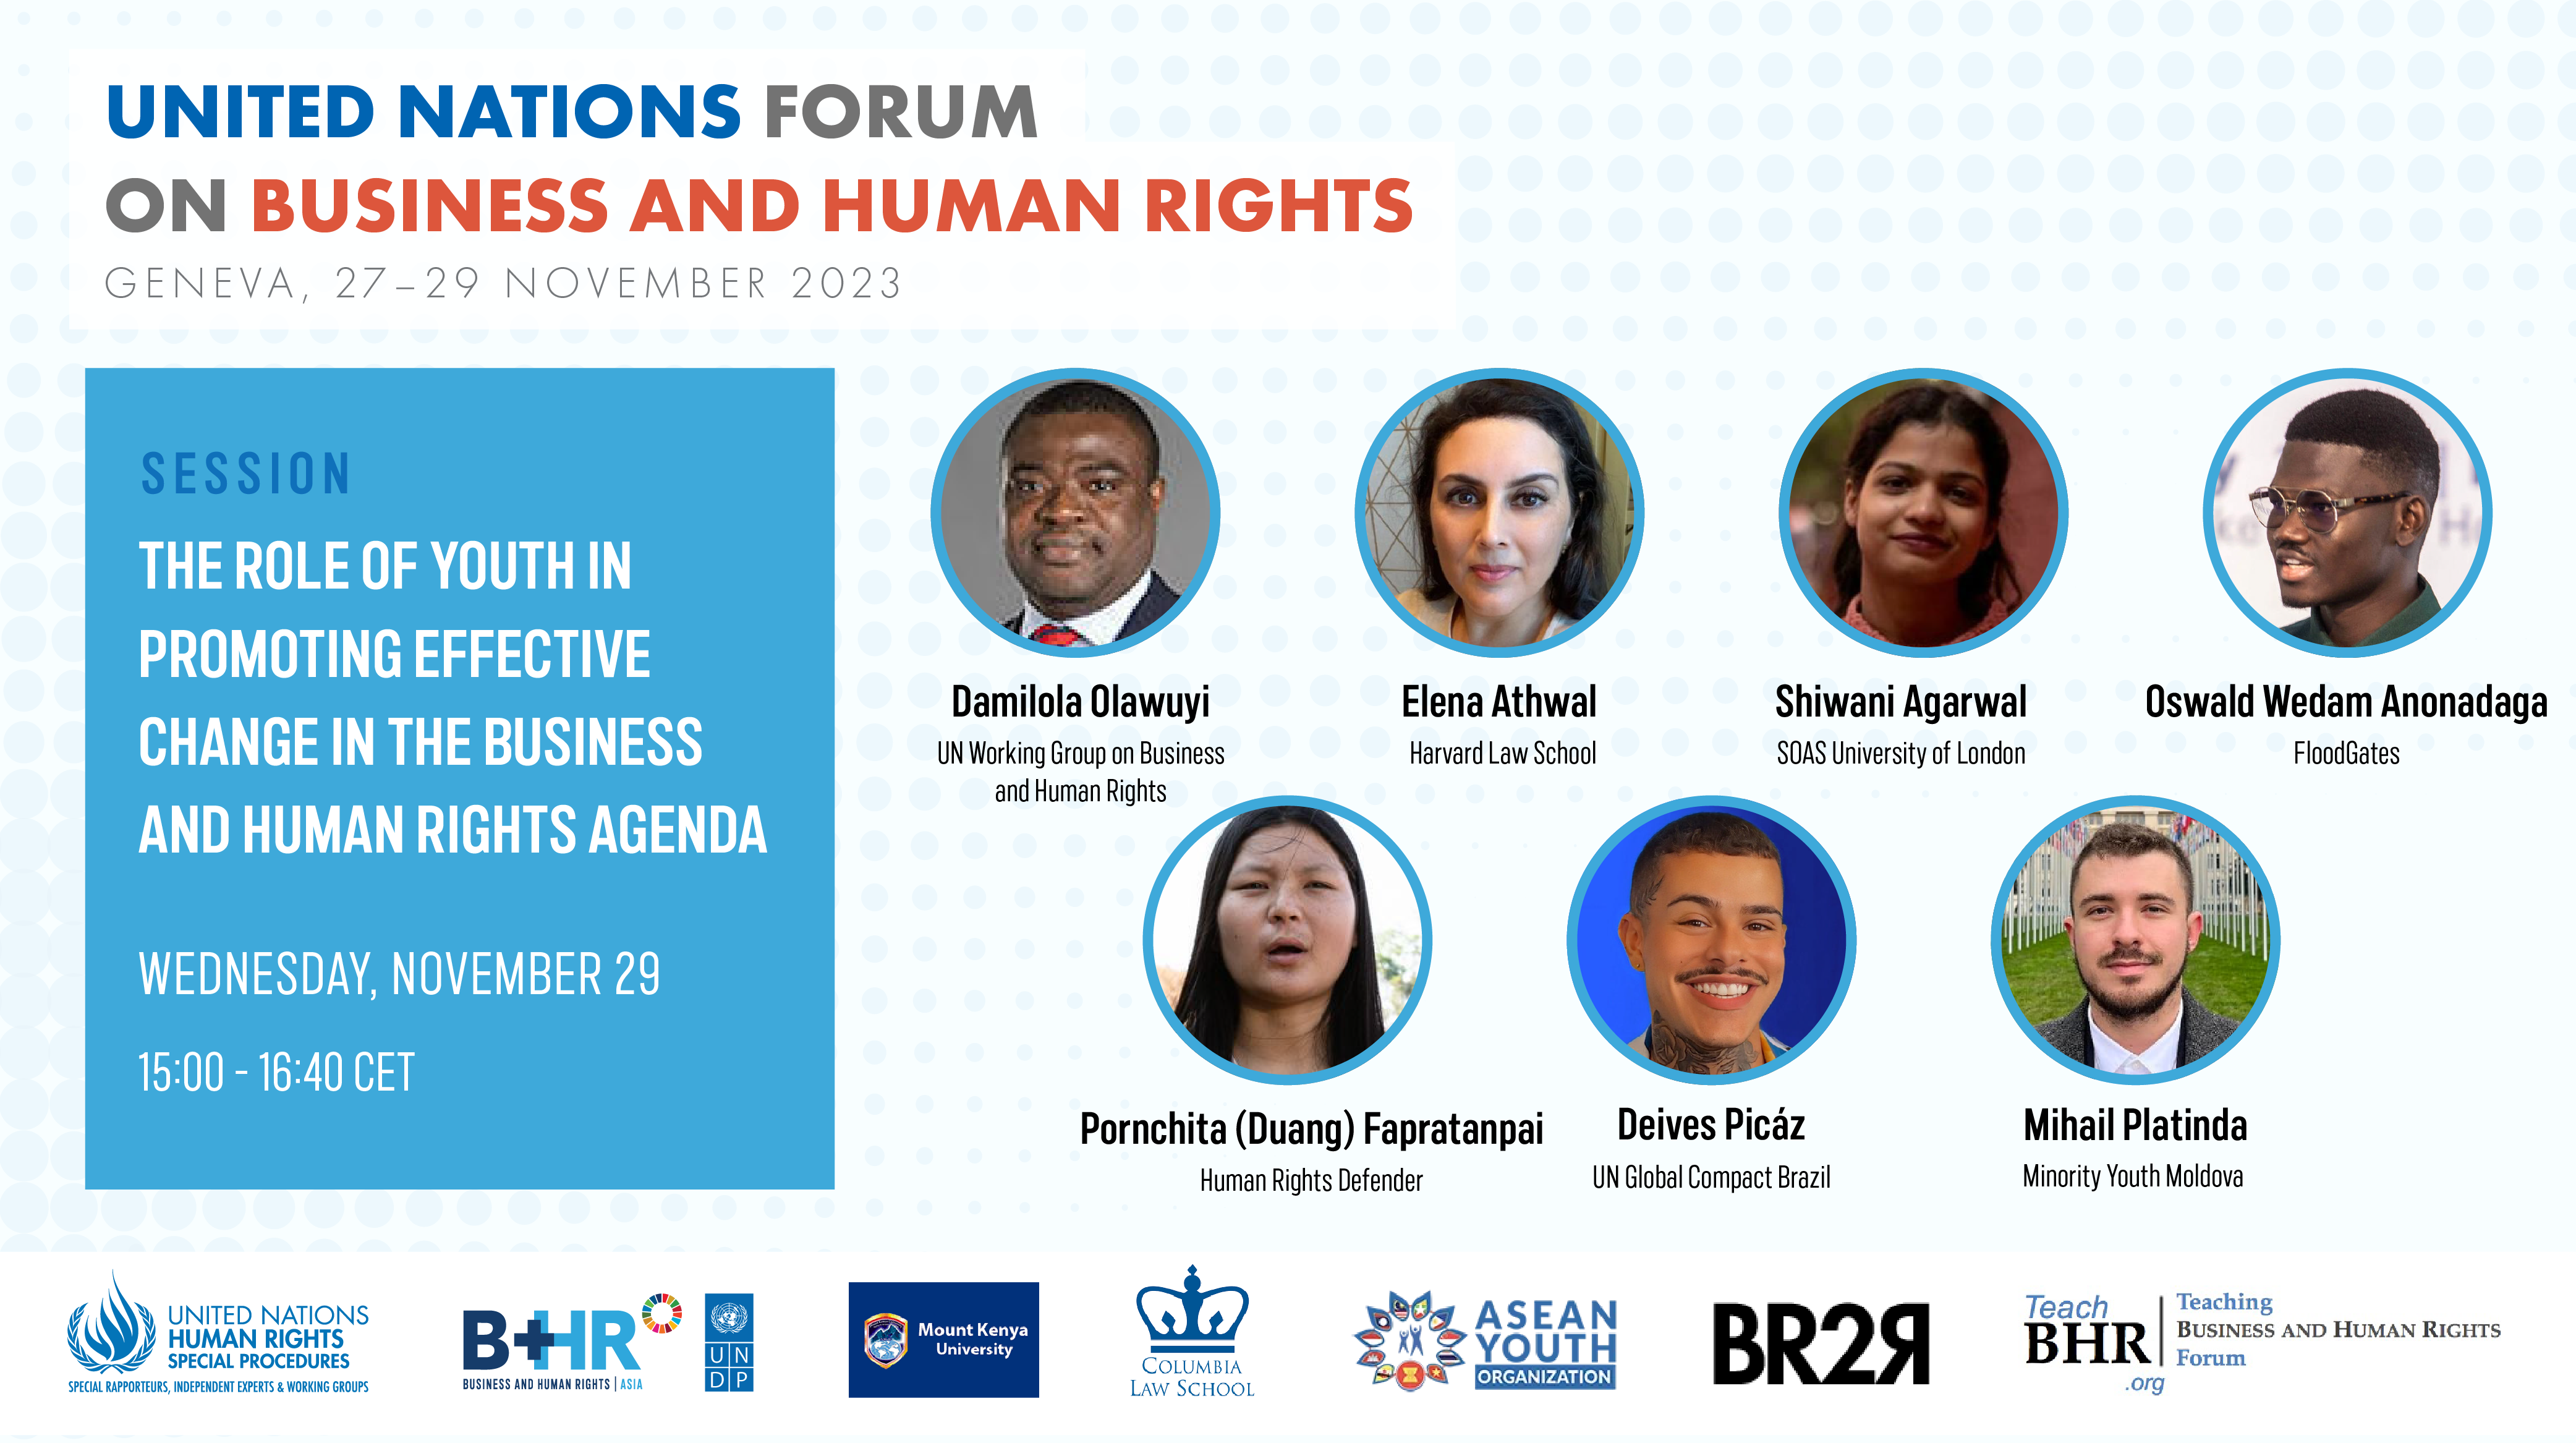 UN Annual Forum on BHR - Youth Session